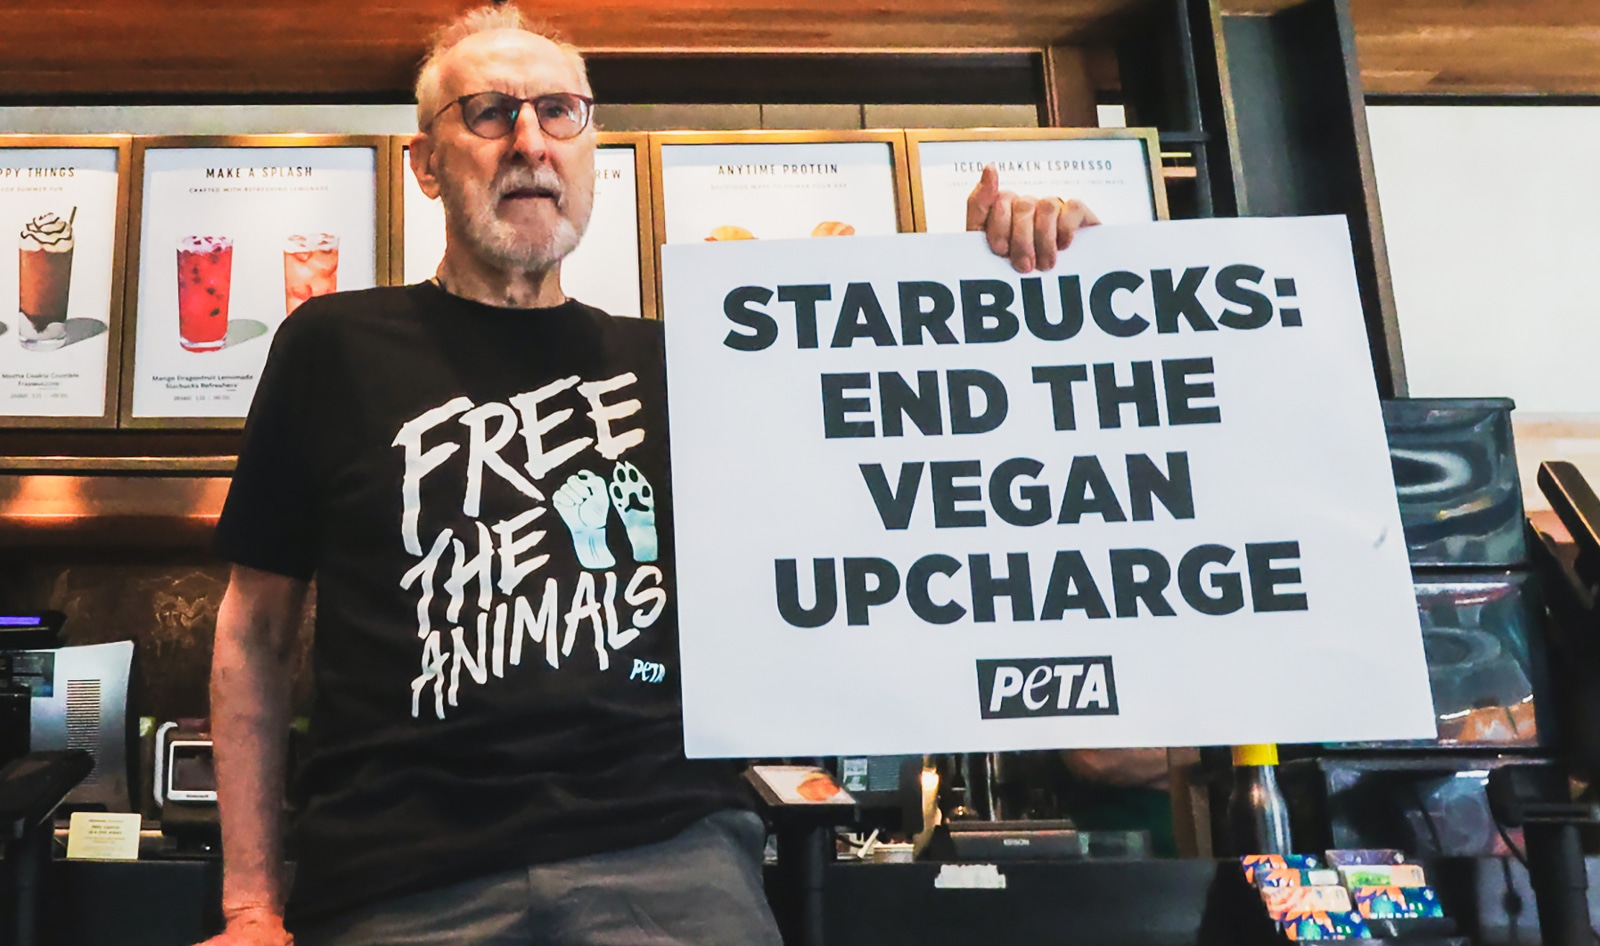 James Cromwell Joins Celebrities in Protest of Starbucks’ Vegan Milk Upcharge